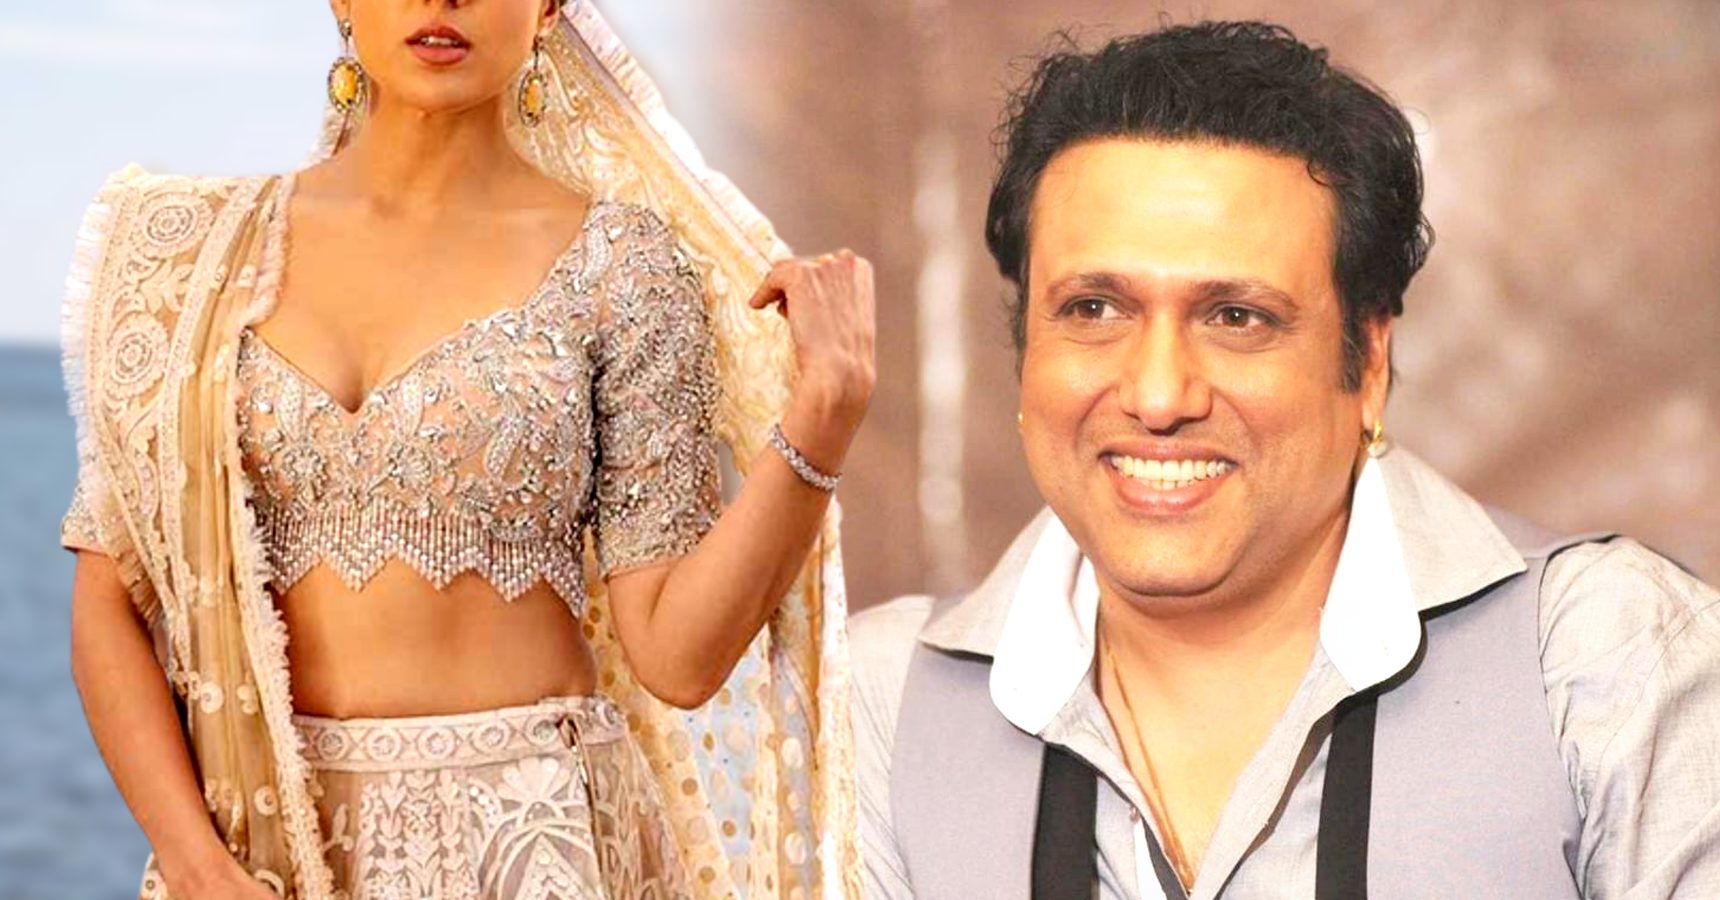 Govinda had affair with bengali actress even after marriage